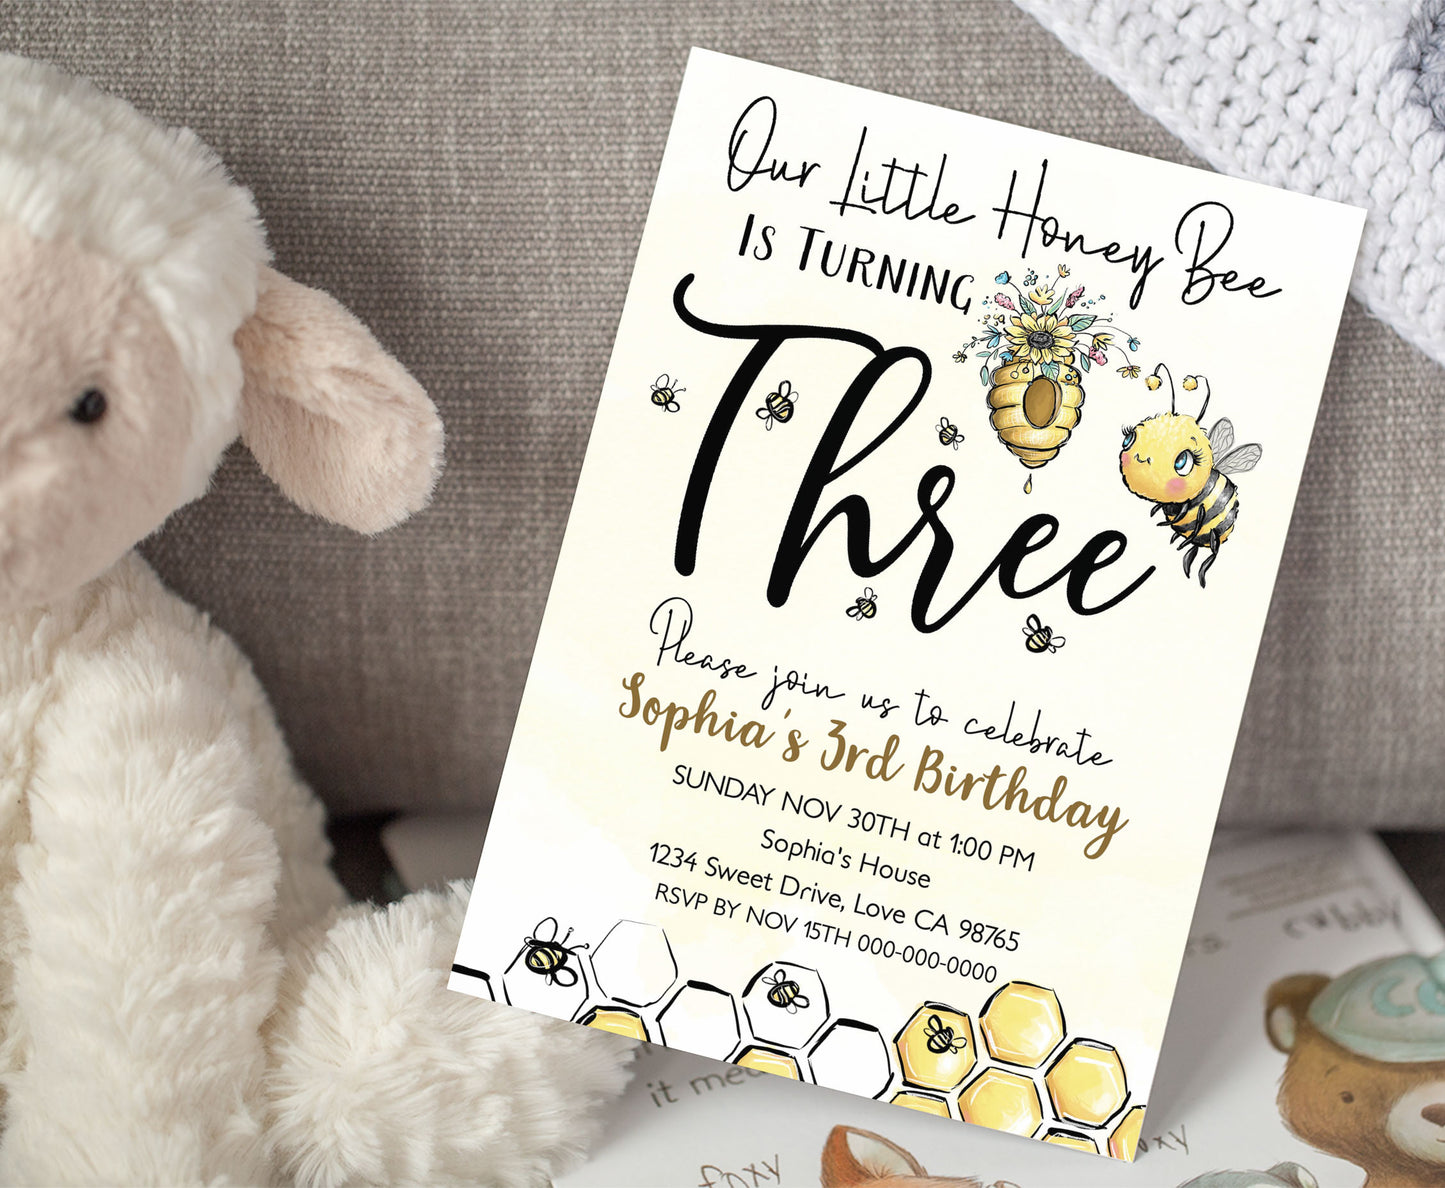 Our Little Honey Bee is Turning Three | Bee 3rd Birthday Party Invite - 61A